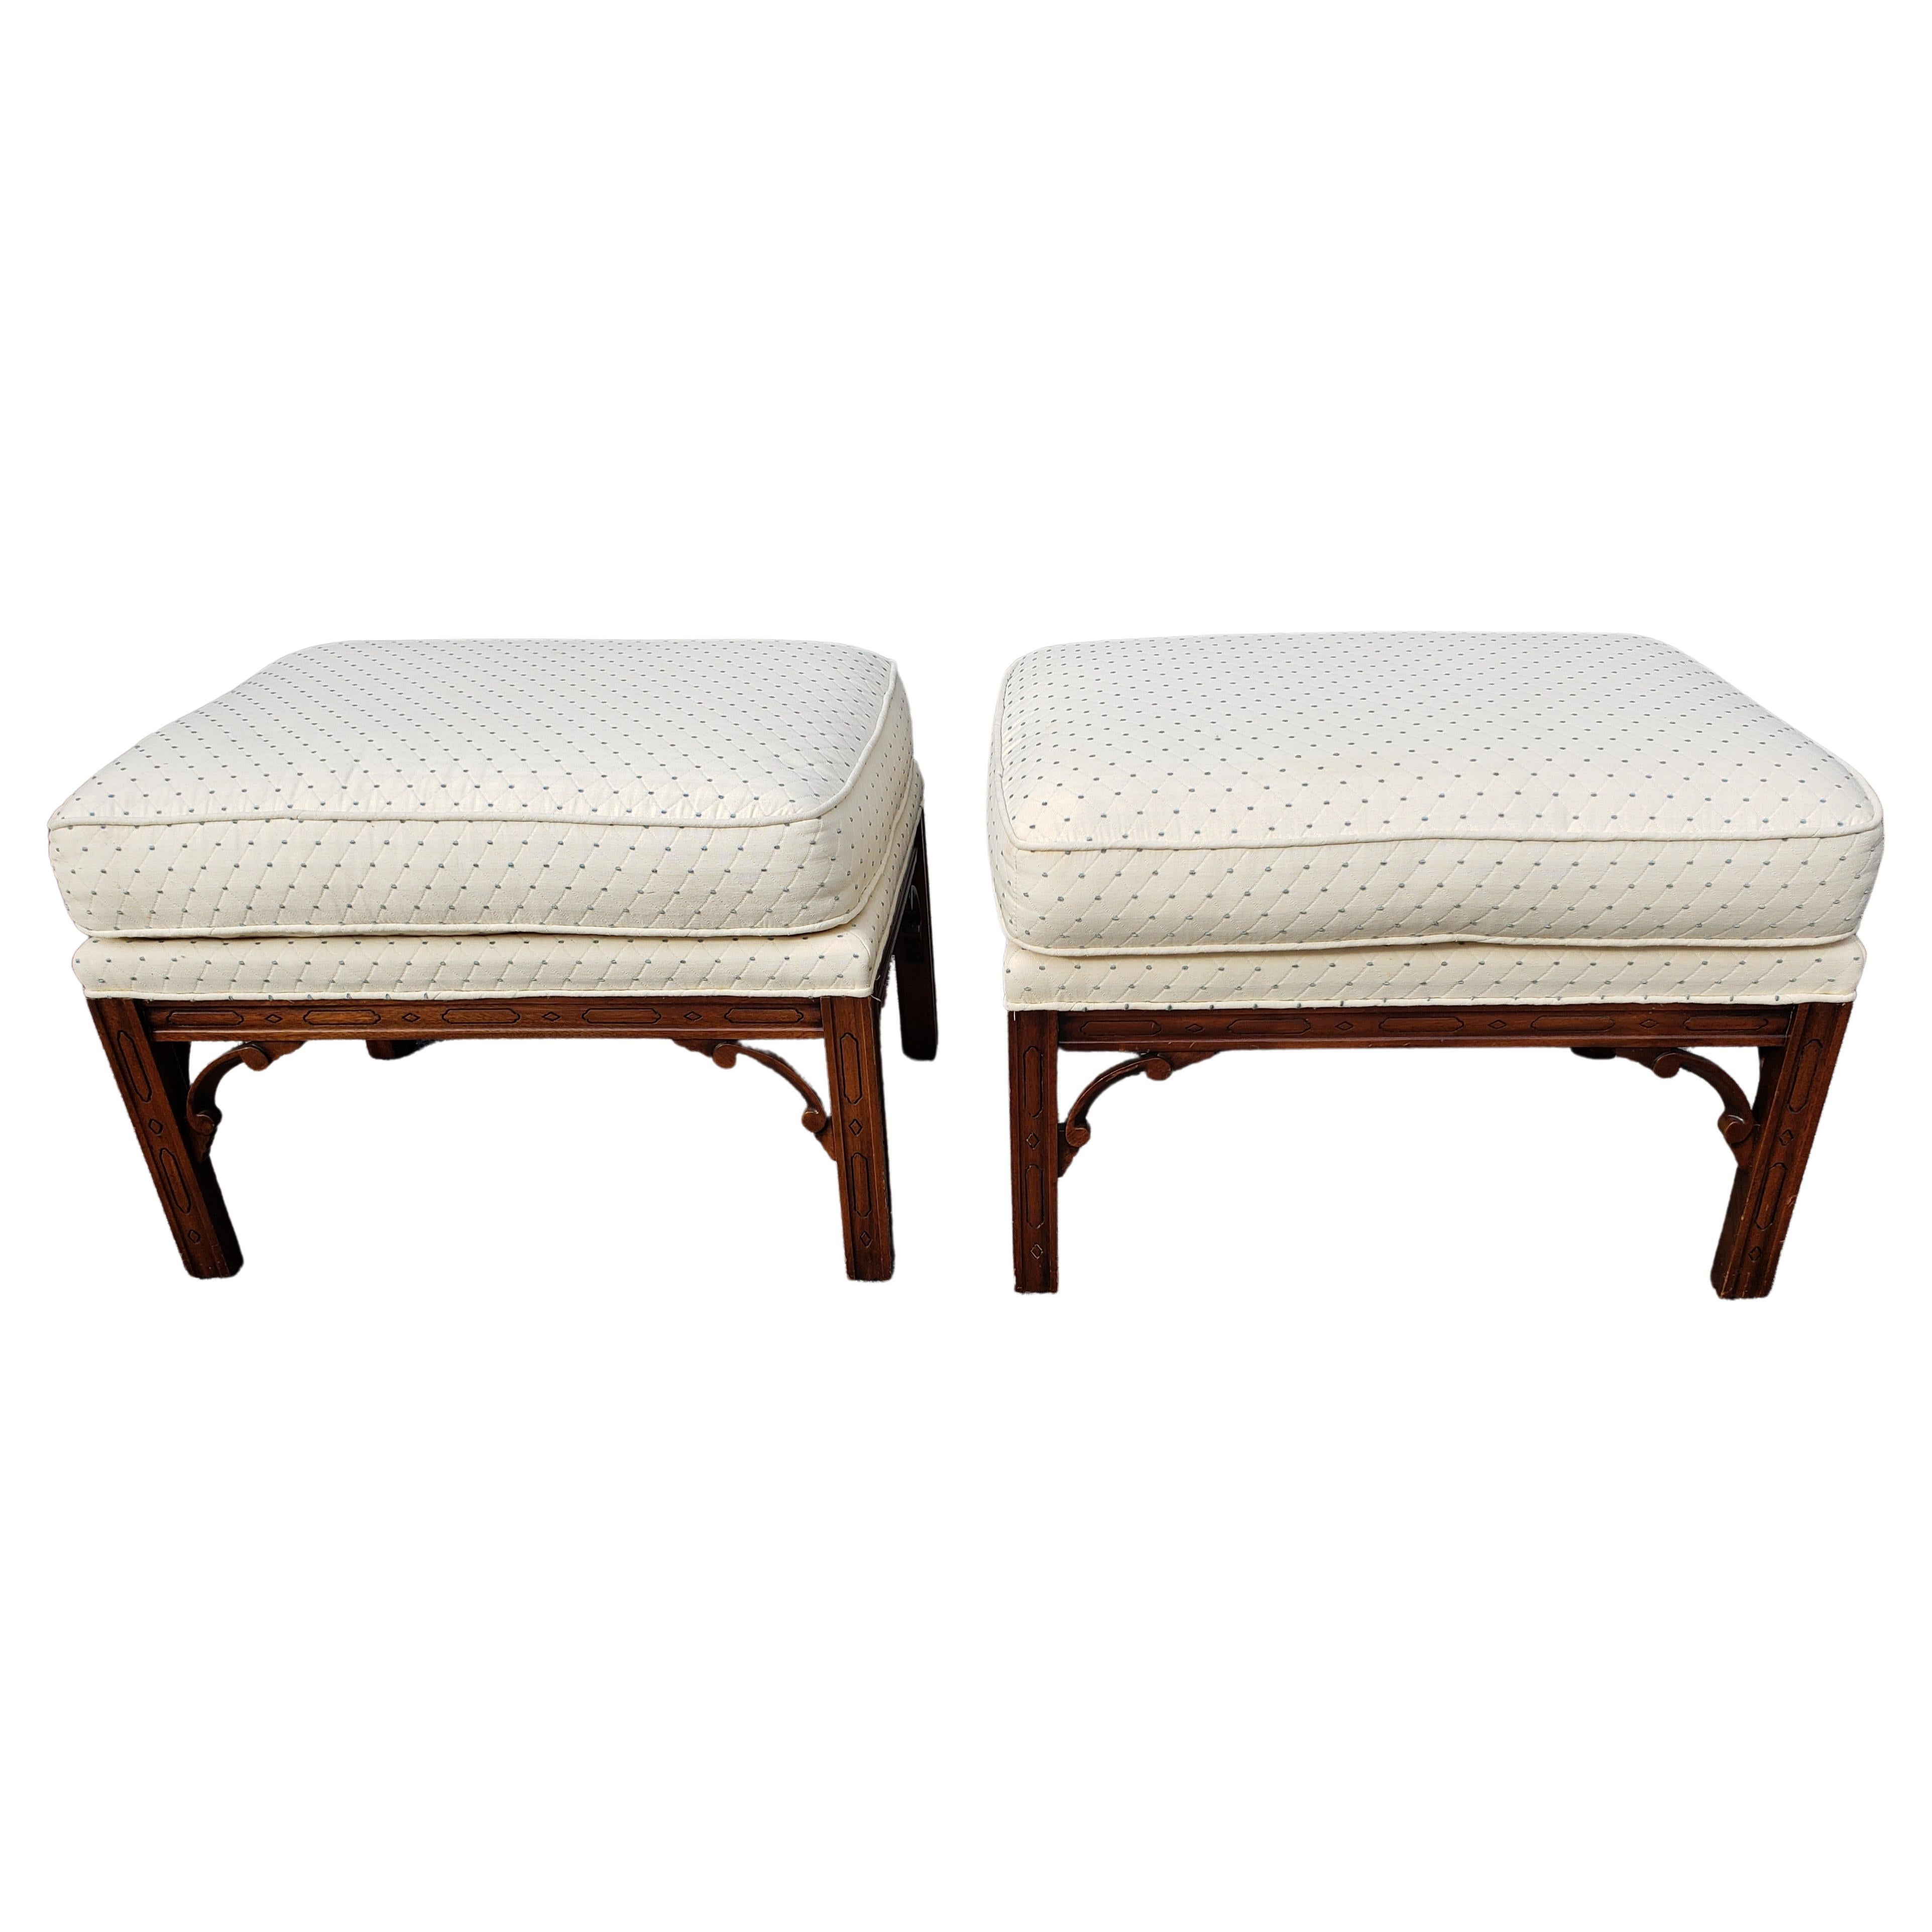 Pair of Modern Chippendale Mahohany Upholstered Ottomans / Benches